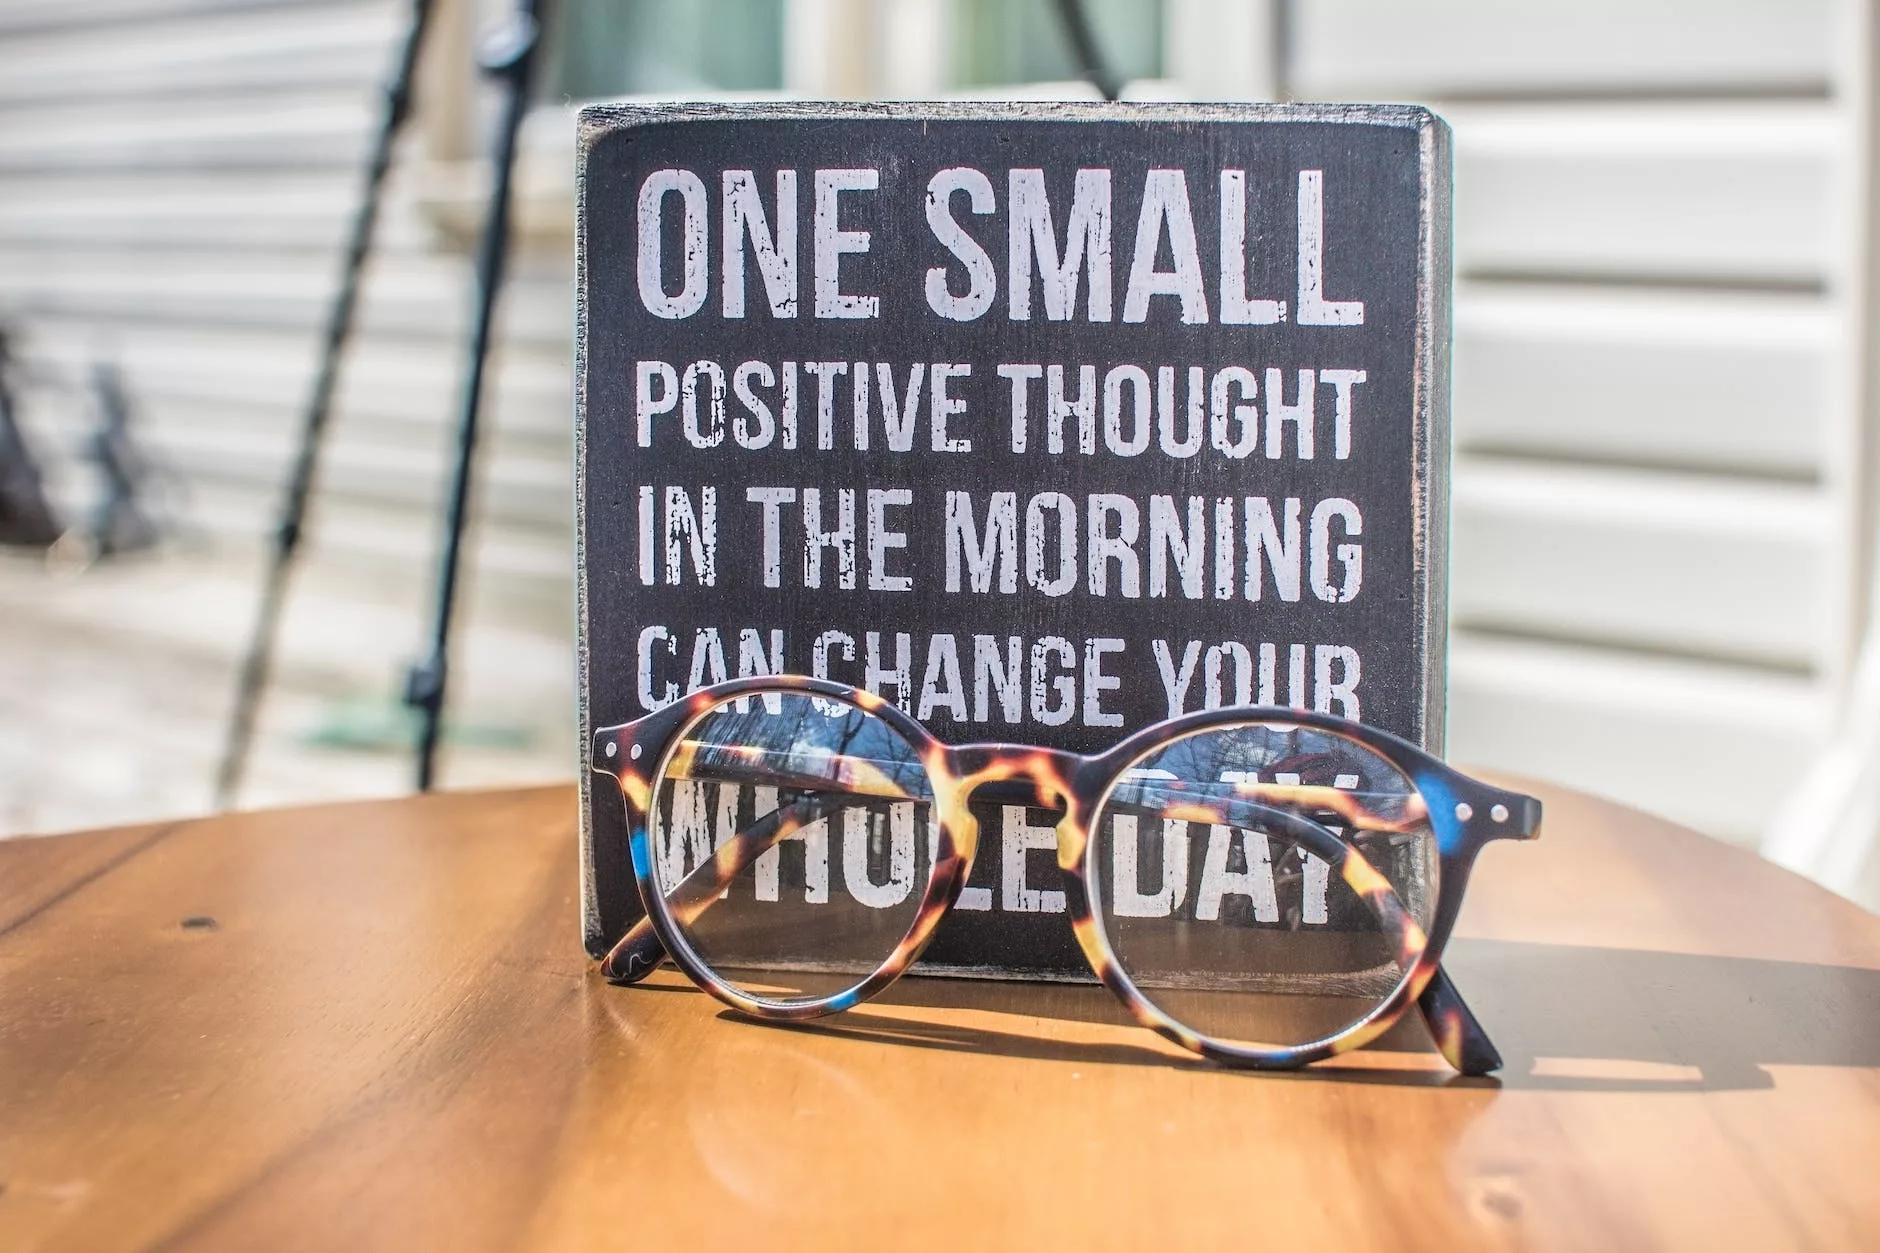 A motivational quote on a sign with eyeglasses in front, sitting on a wooden table outdoors.